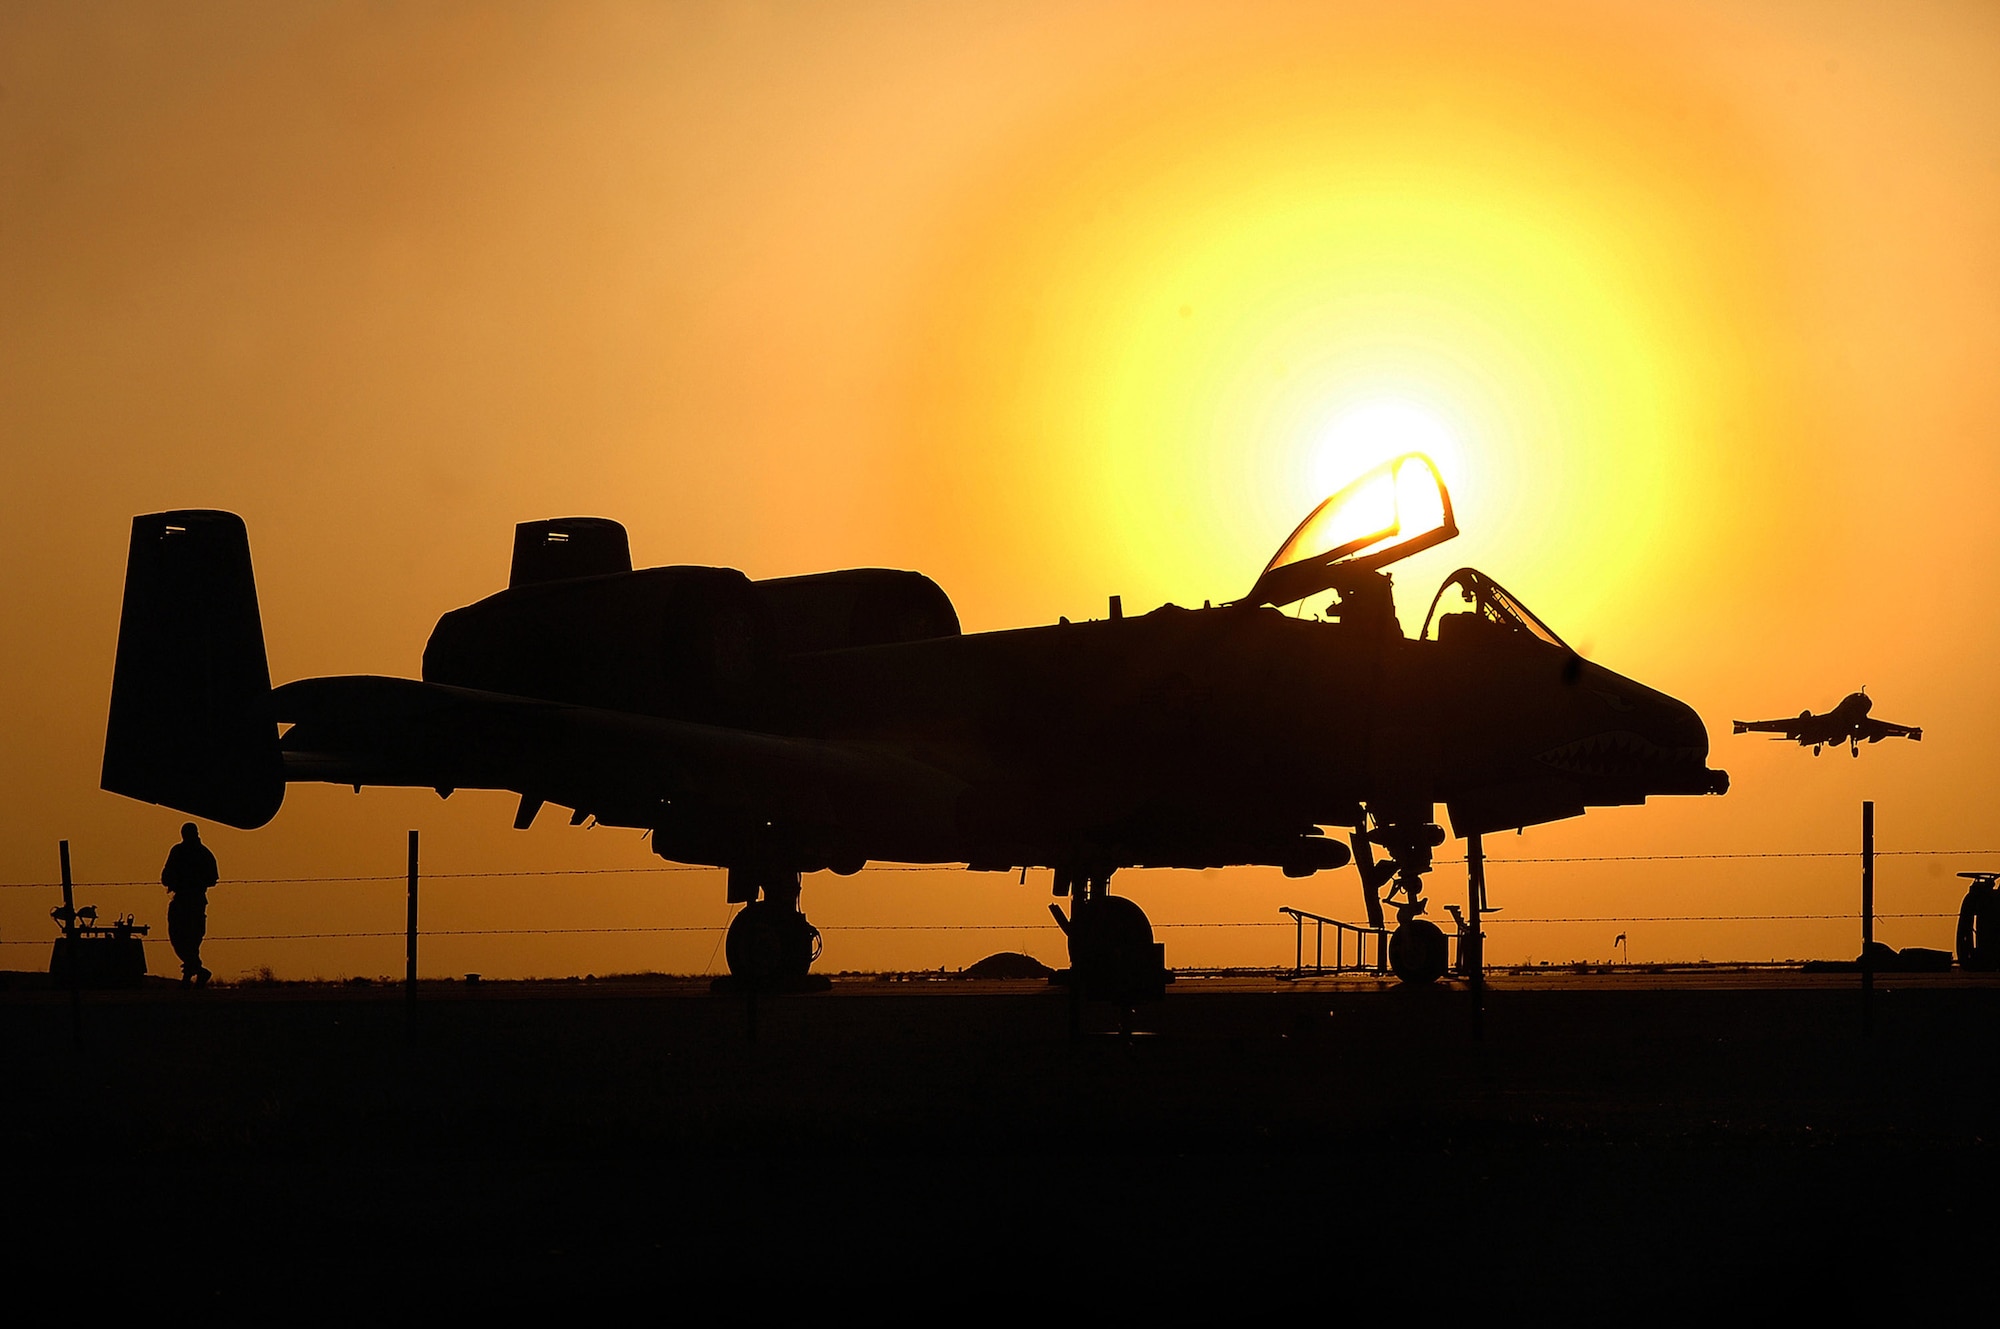 Maintenance crews on the A-10 Thunderbolt II end their 12-hour duty day April 25 at the Al Asad Air Base, Iraq. The 438th Air Expeditionary Group A-10s perform 10 sorties daily providing top cover for ground forces in Iraq, with 900 sorties in this last four months. (U.S. Air Force photo/Tech. Sgt. Cecilio M. Ricardo Jr.)
